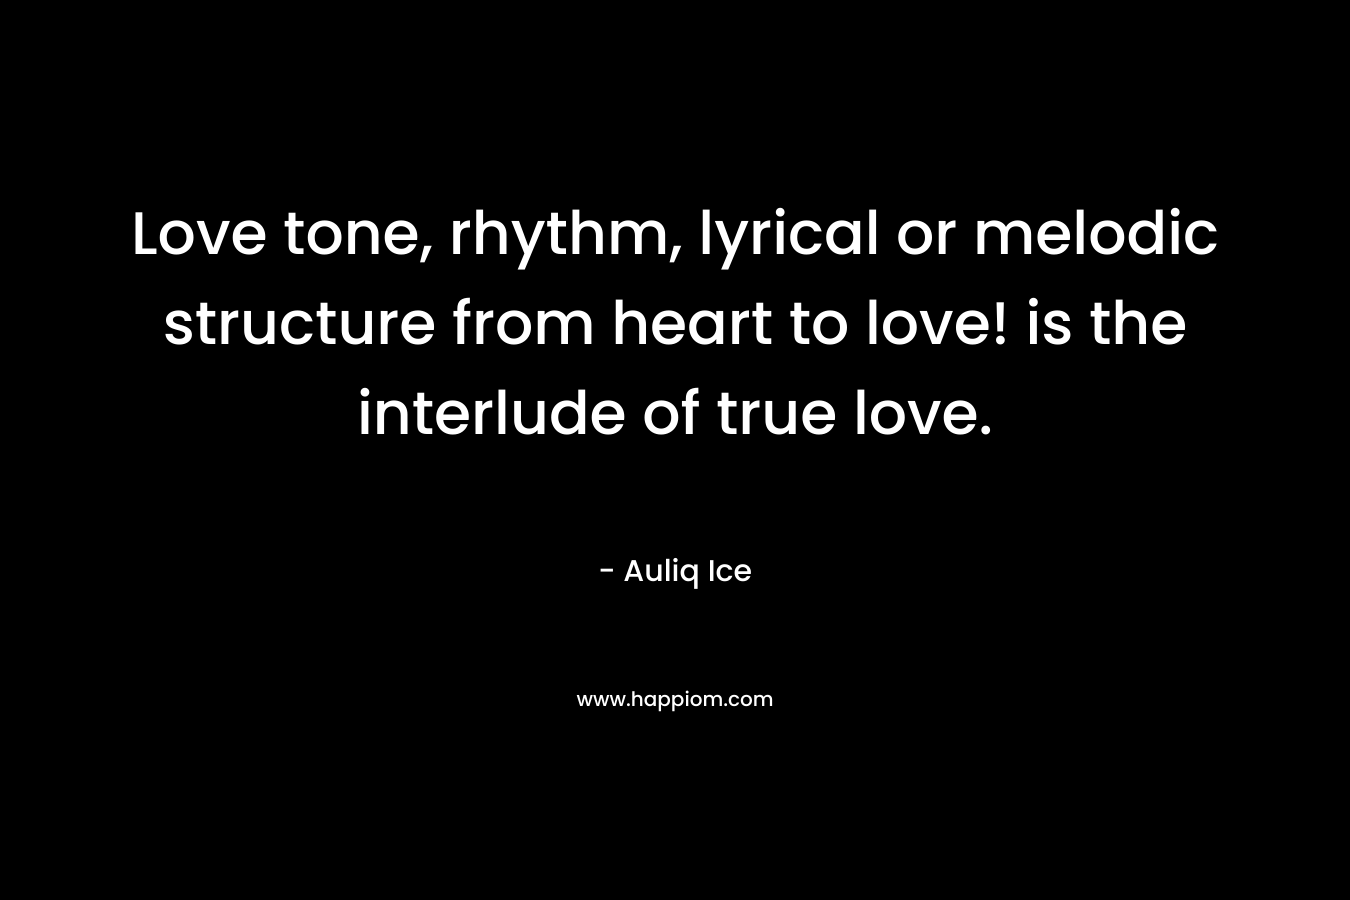 Love tone, rhythm, lyrical or melodic structure from heart to love! is the interlude of true love. – Auliq Ice